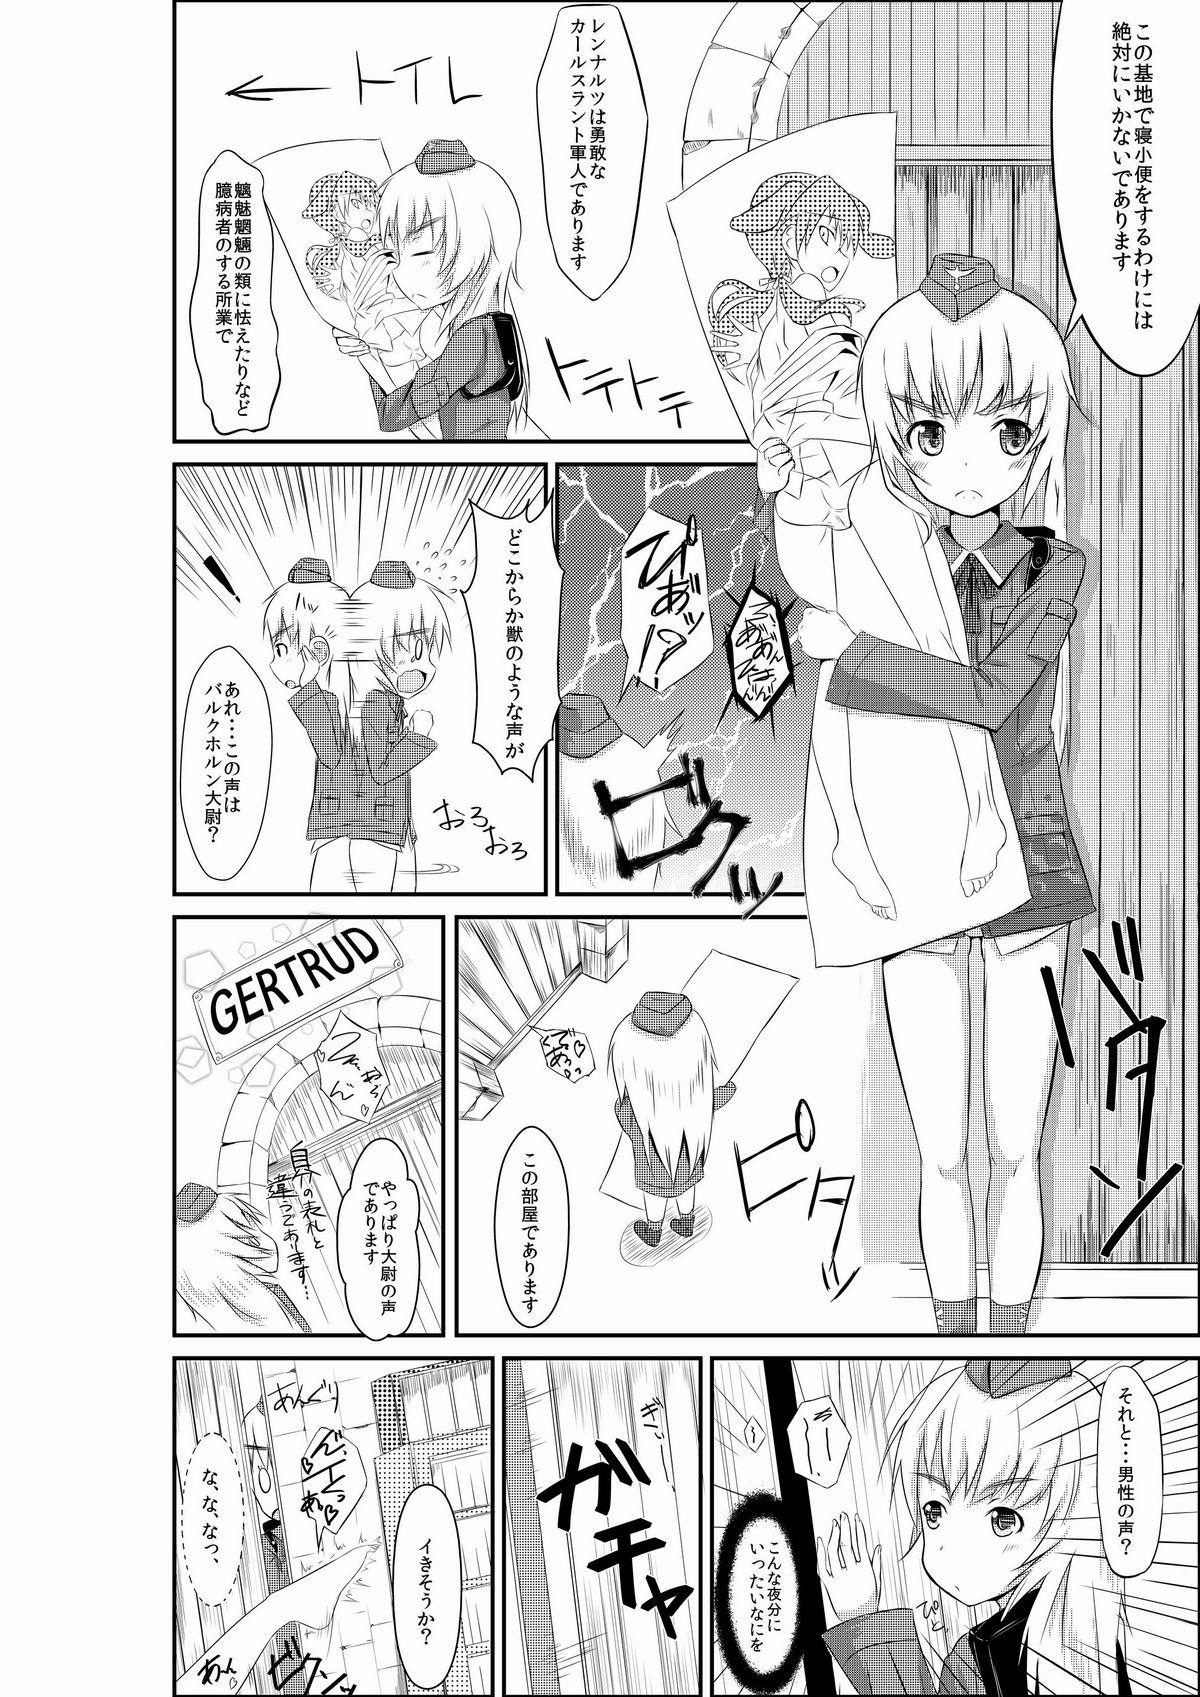 Branquinha 練習 お姉ちゃんとヘルマちゃん - Strike witches Amateur Xxx - Page 2